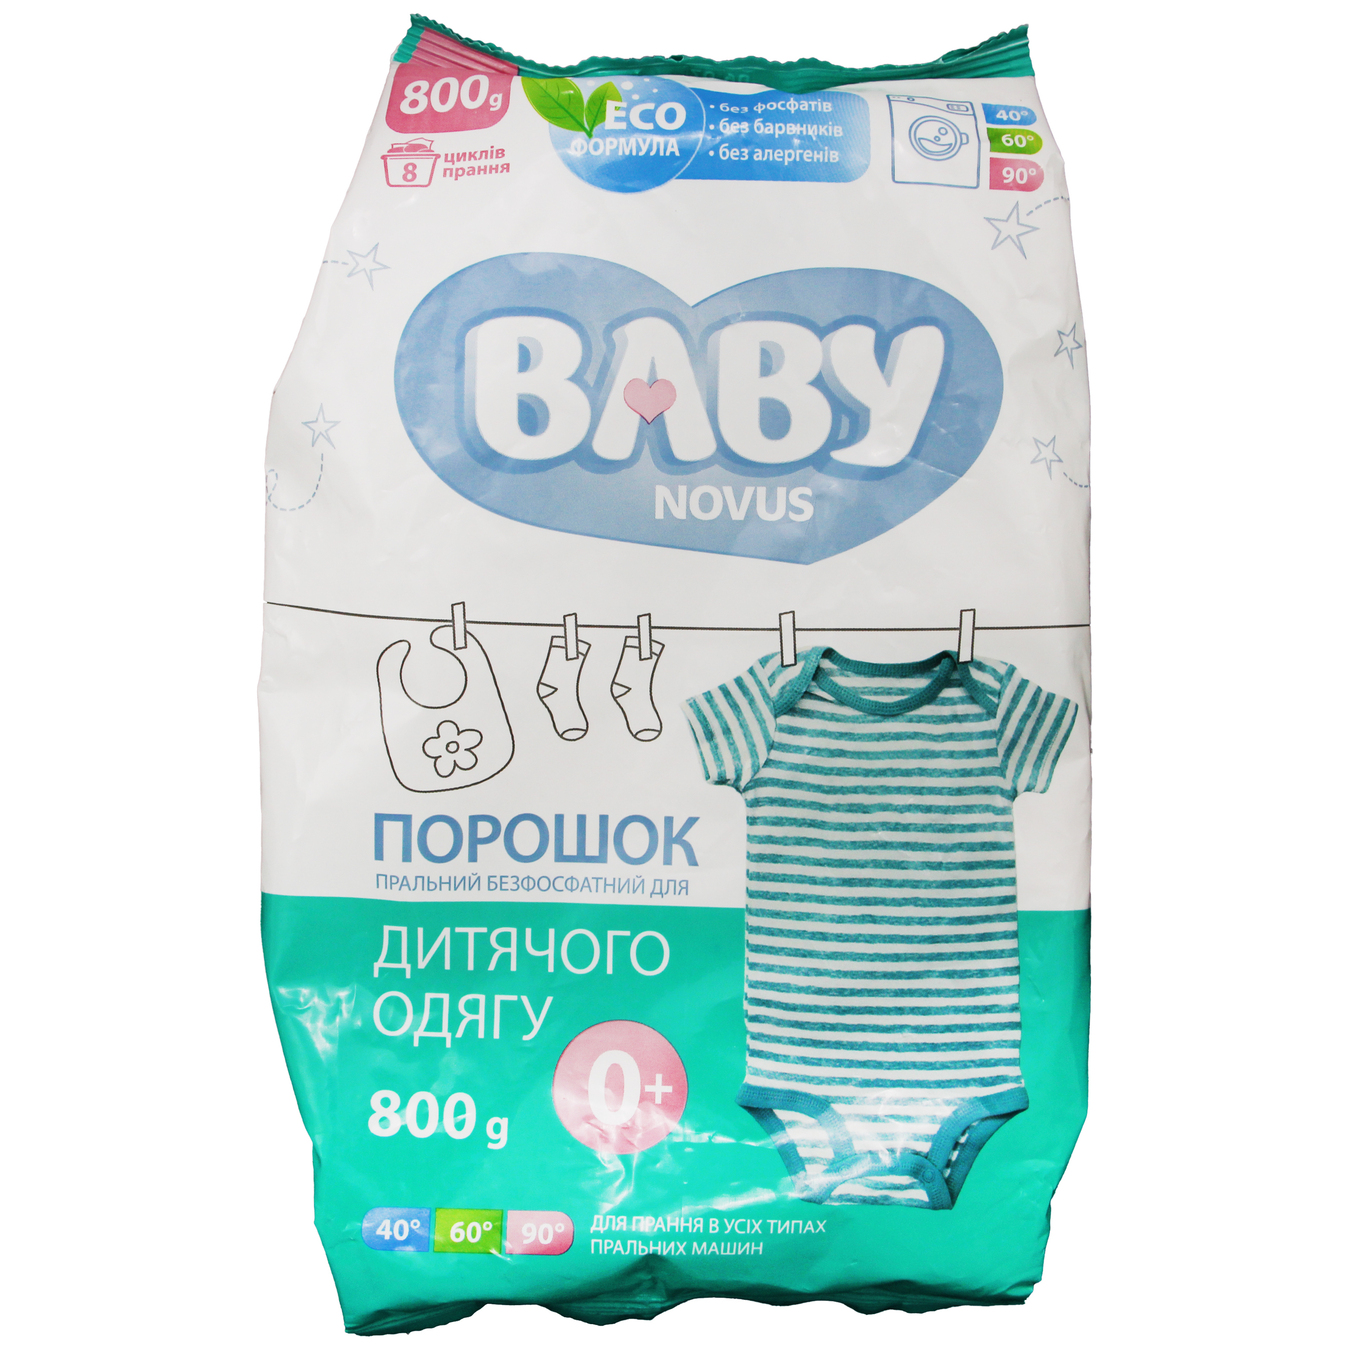 Novus Baby Phosphate-free Washing Powder for Baby Clothes 800g